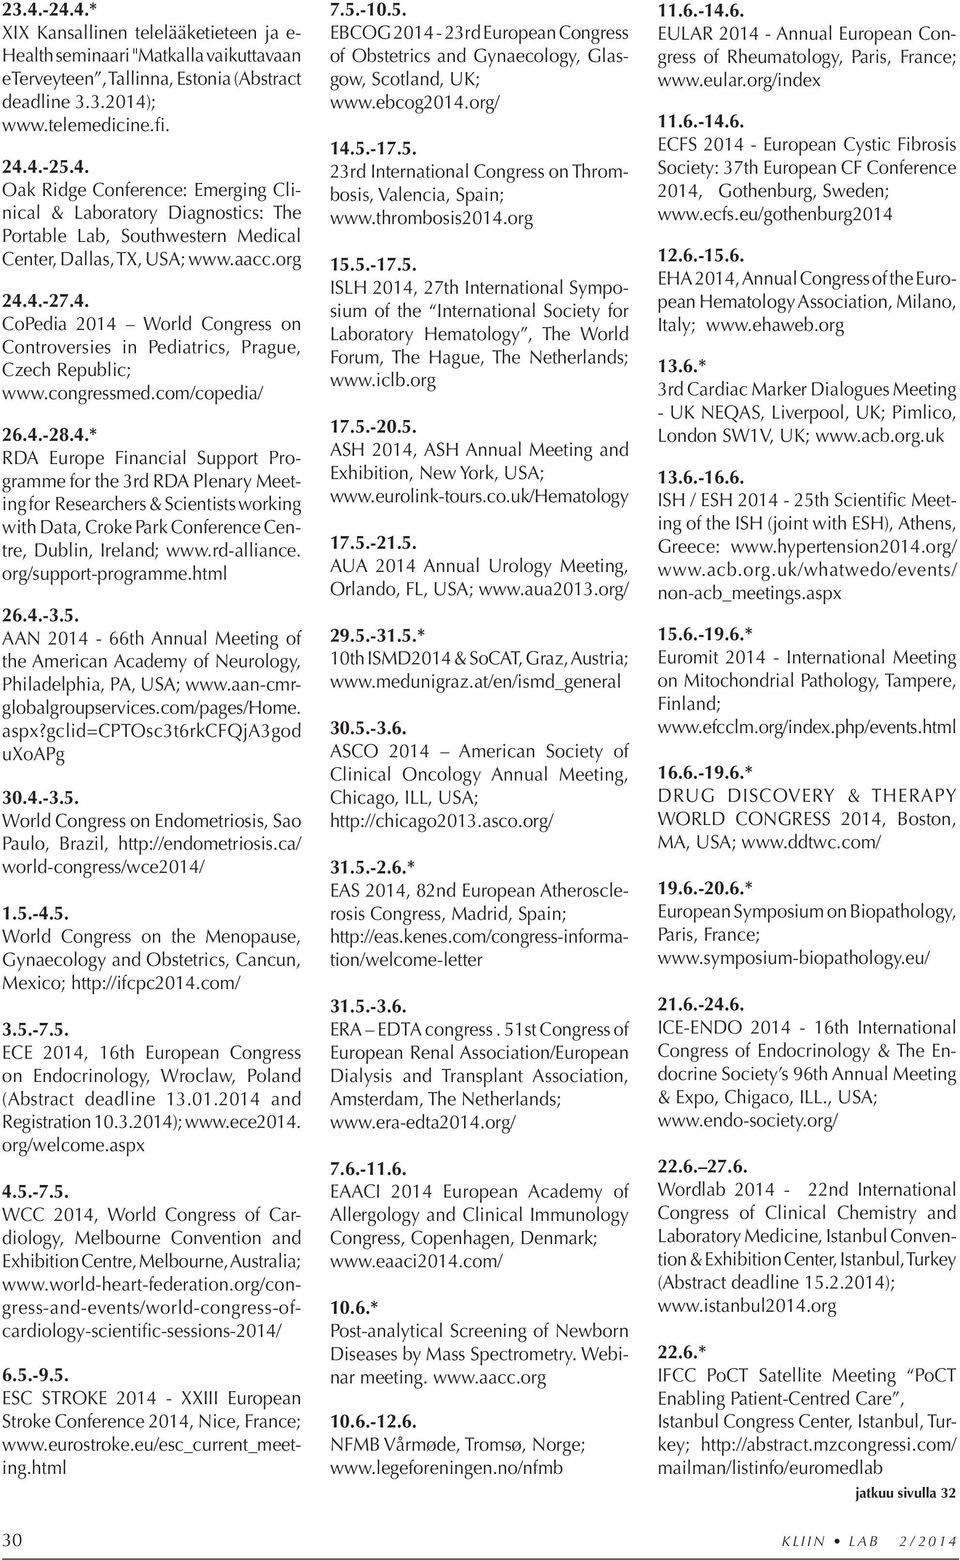 rd-alliance. org/support-programme.html 26.4.-3.5. AAN 2014-66th Annual Meeting of the American Academy of Neurology, Philadelphia, PA, USA; www.aan-cmrglo balgroupservices.com/pages/home. aspx?